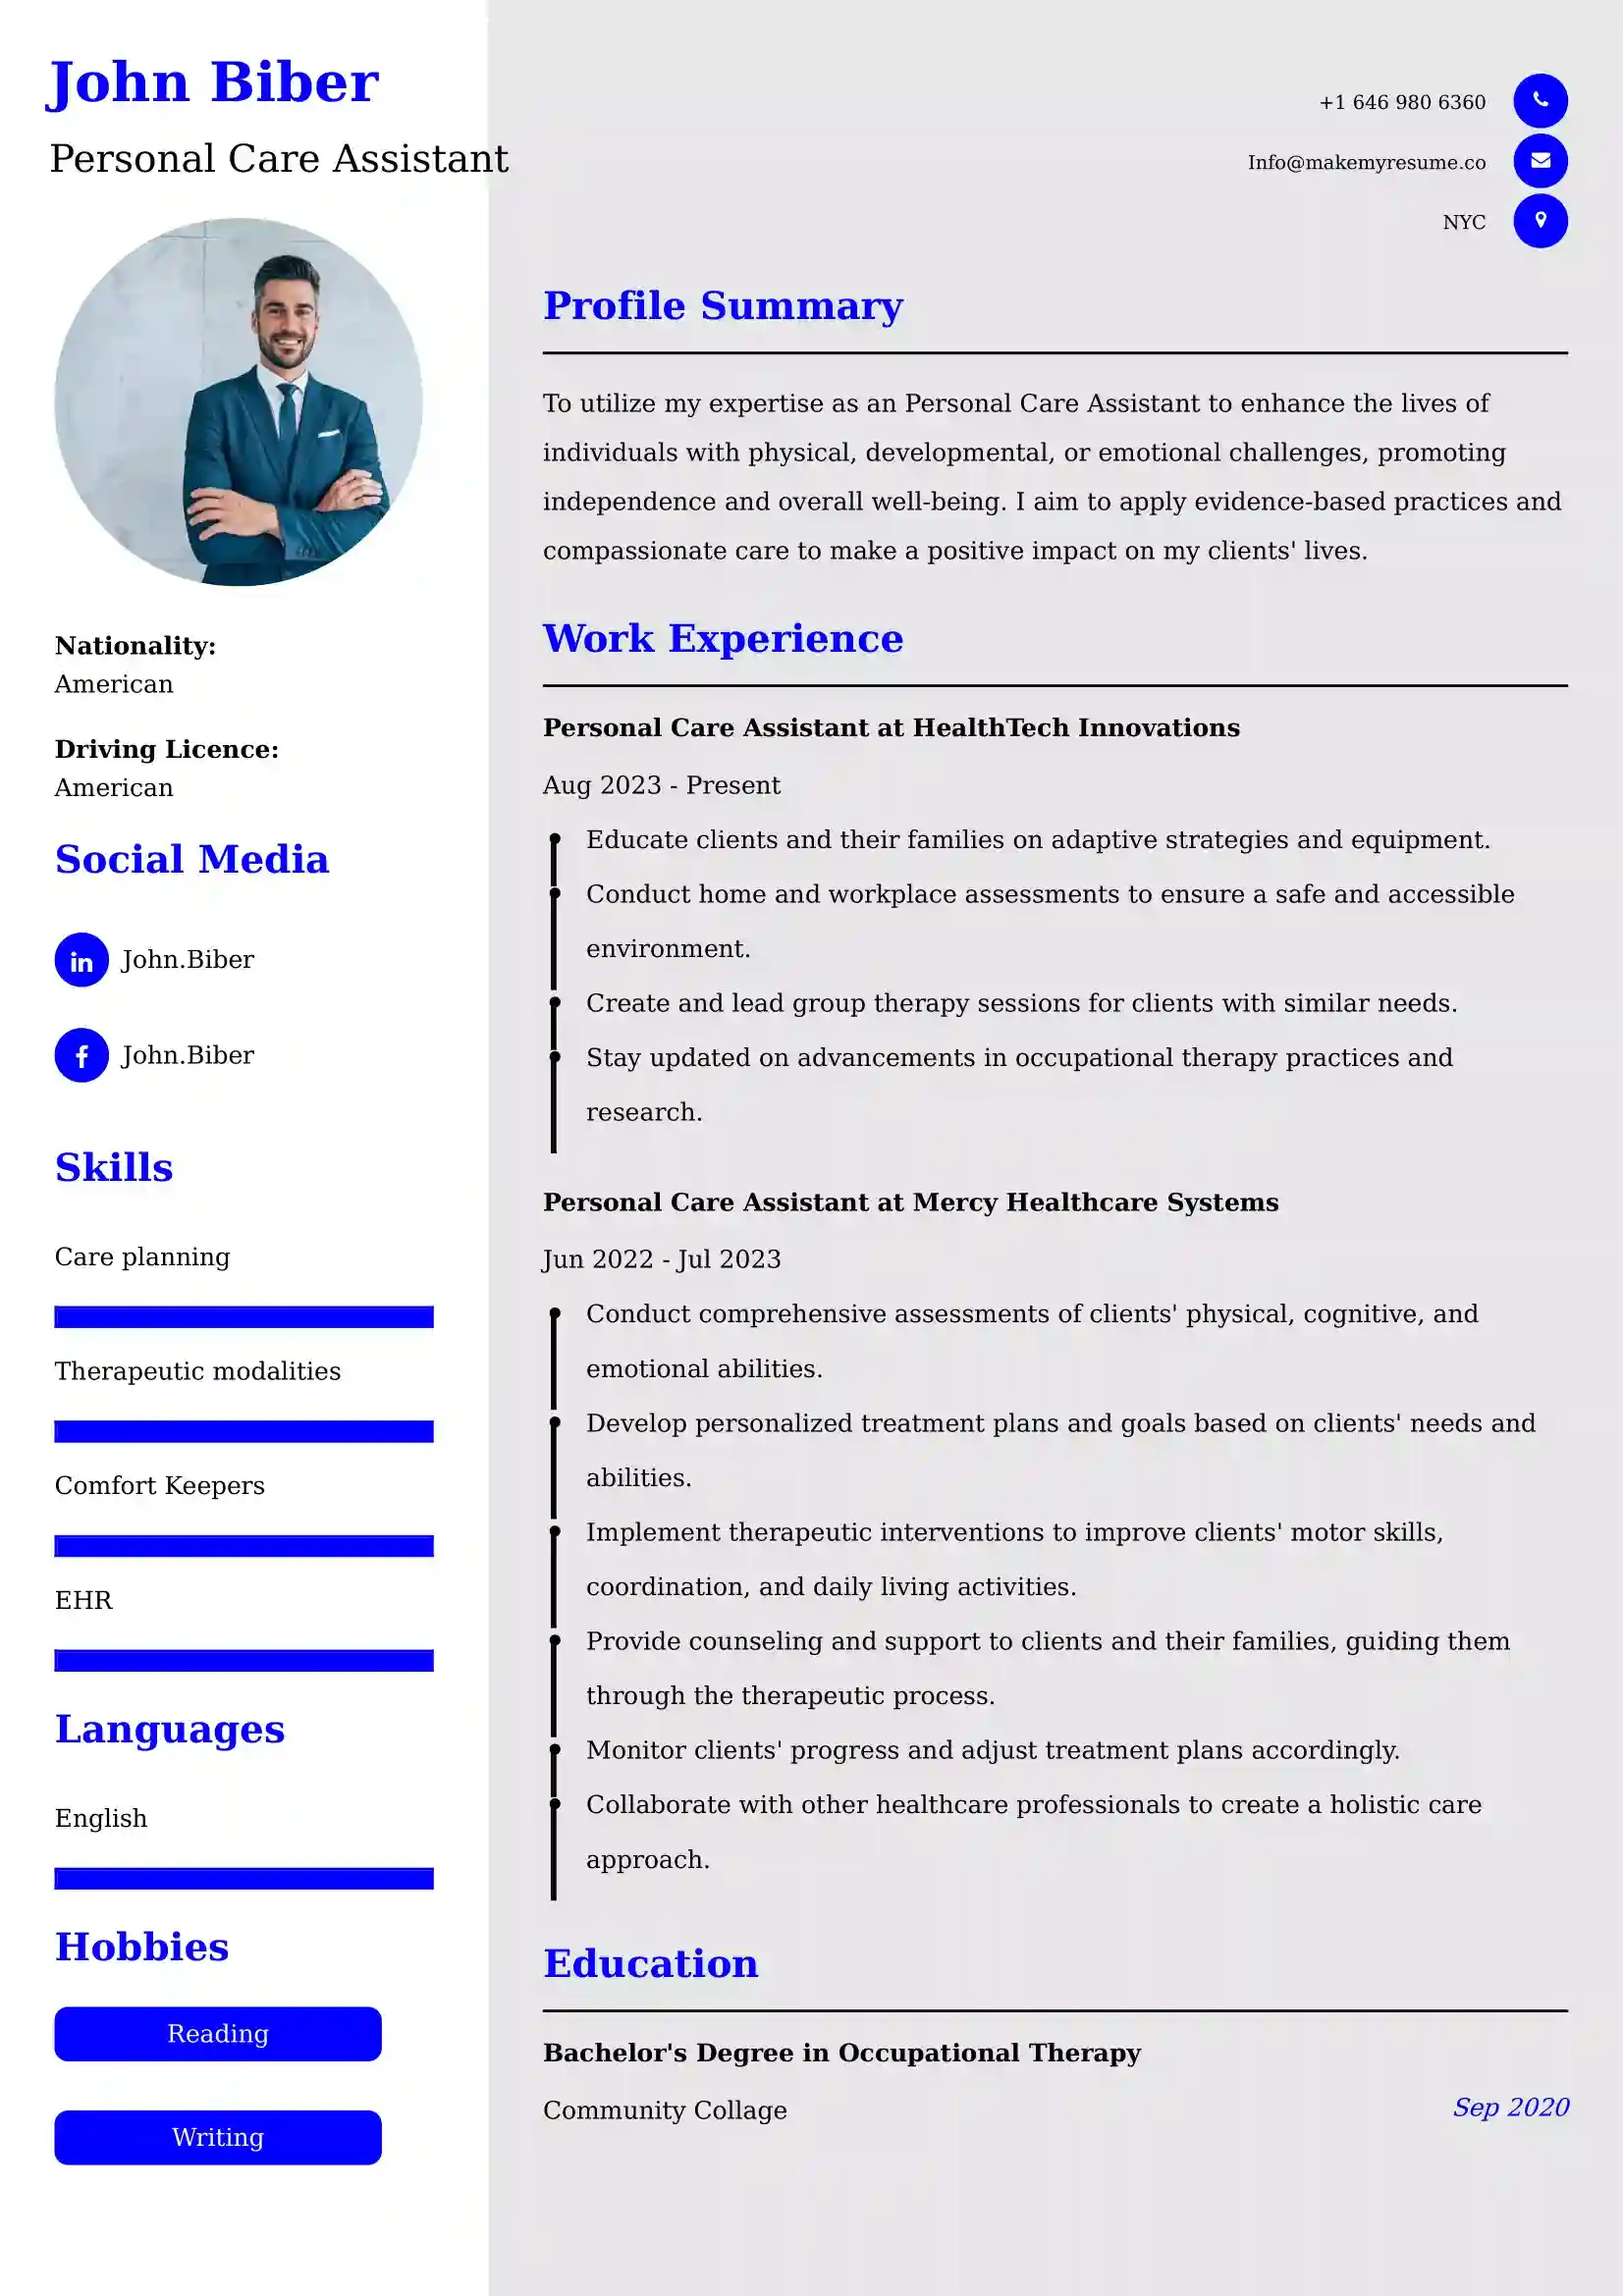 Personal Care Assistant CV Examples - US Format